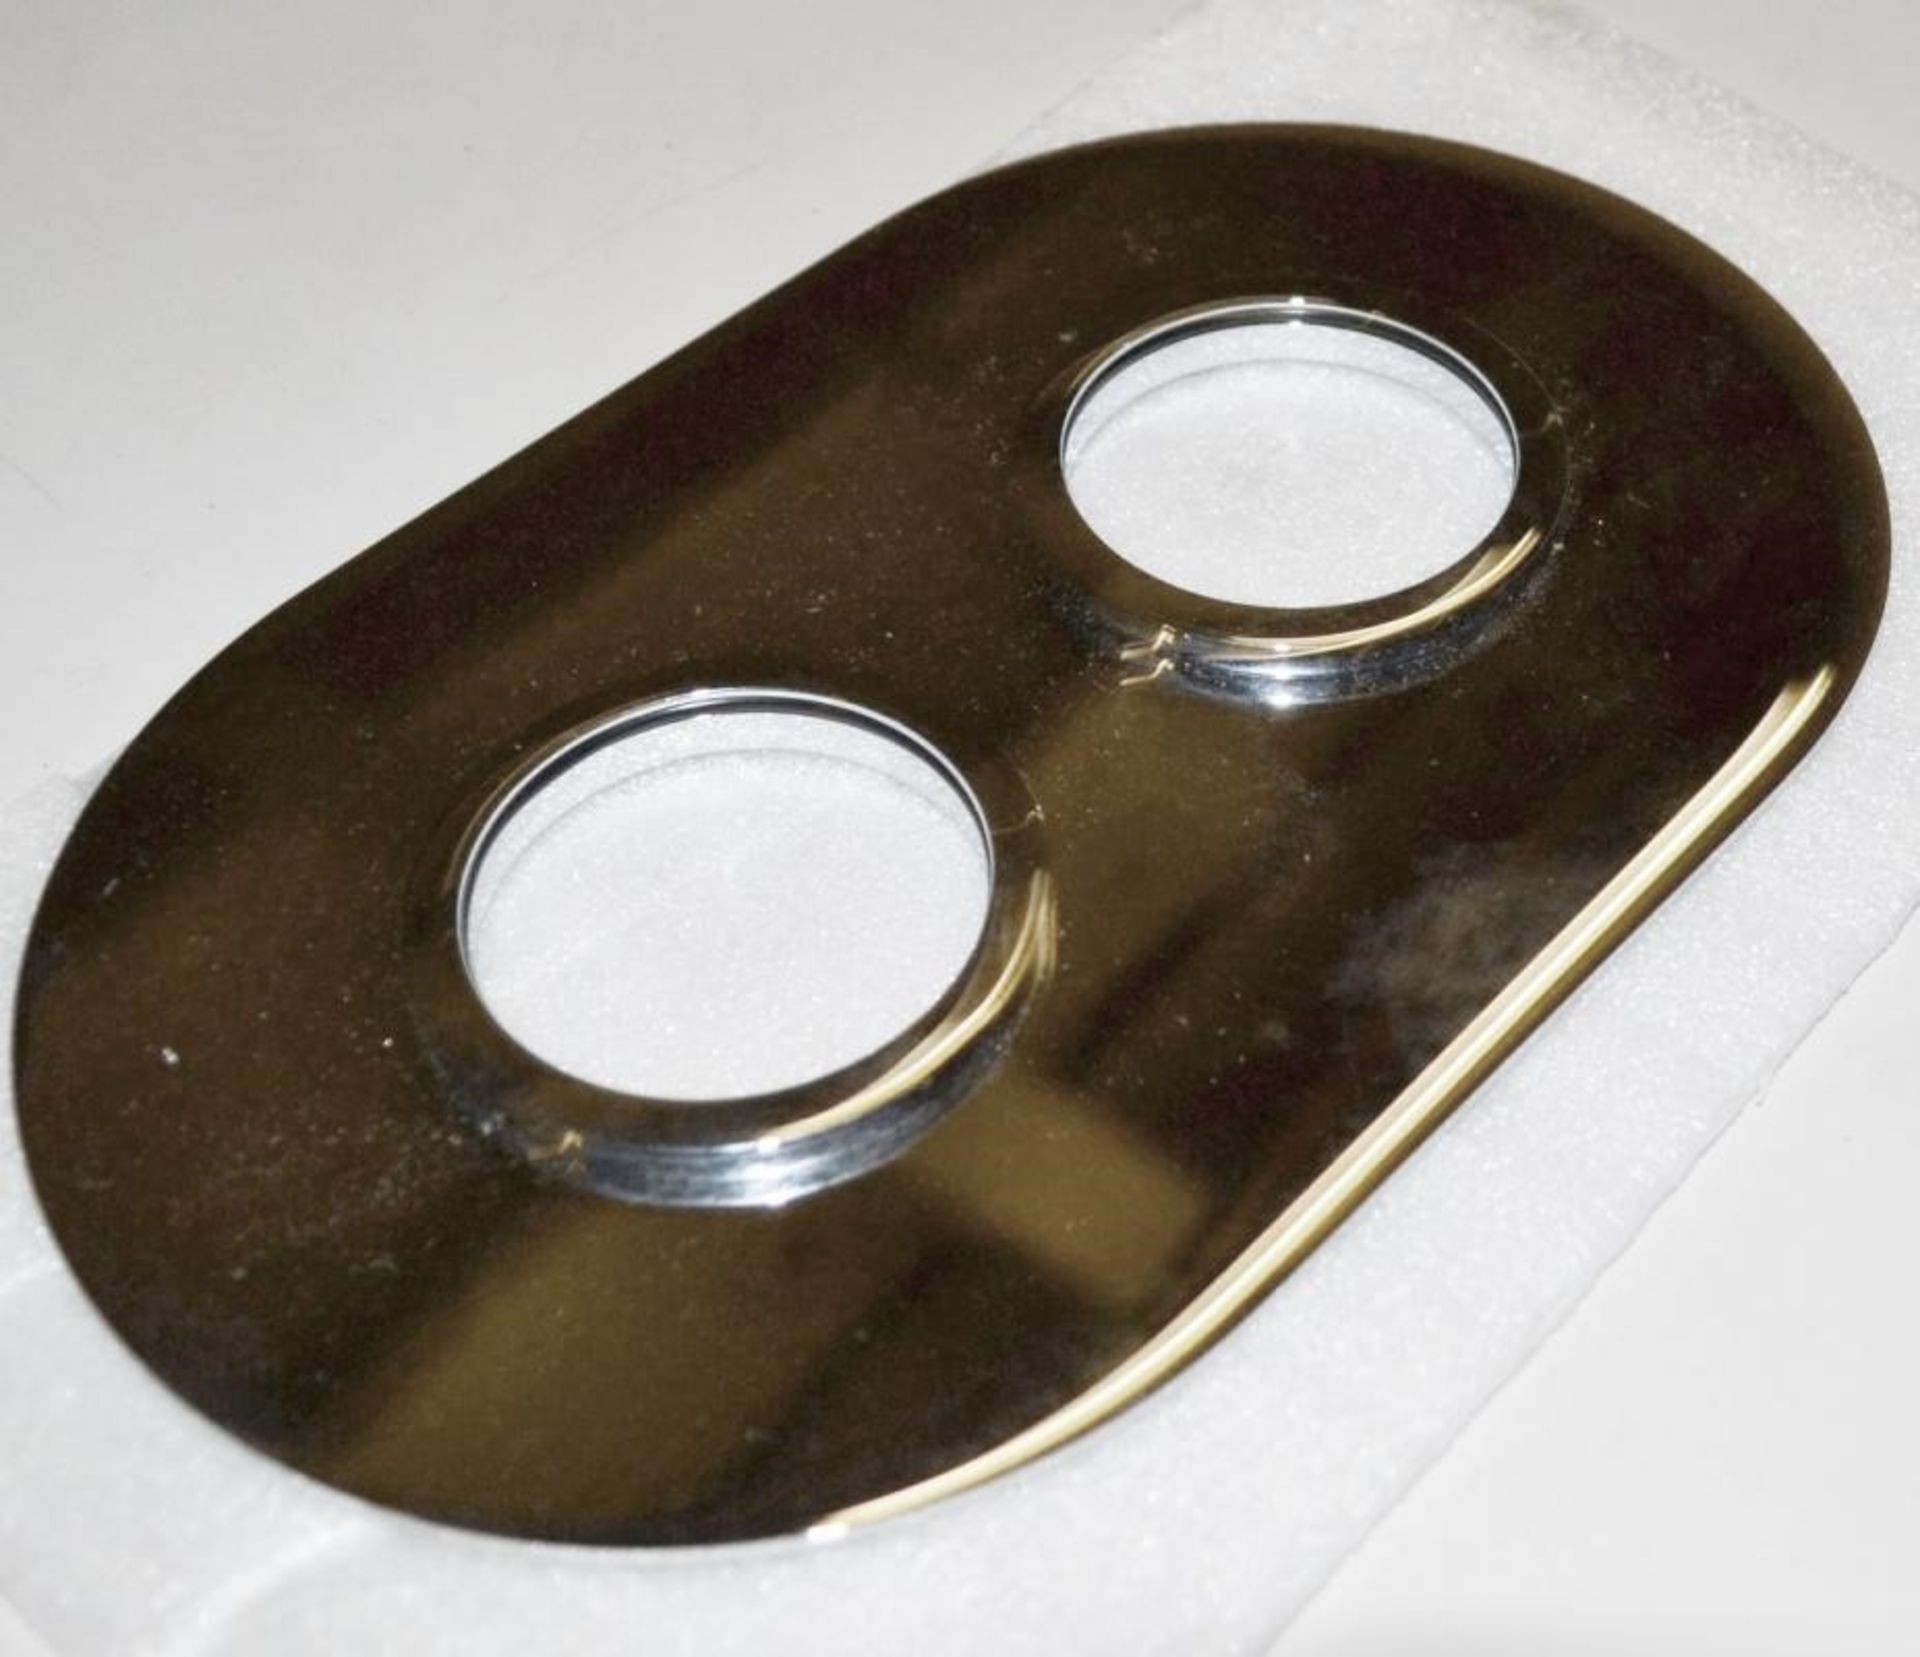 1 x Twin Hole Oval Shower Valve Cover Plate - Ref: DY115/CNP1003 - CL190 - Unused Stock - Location: